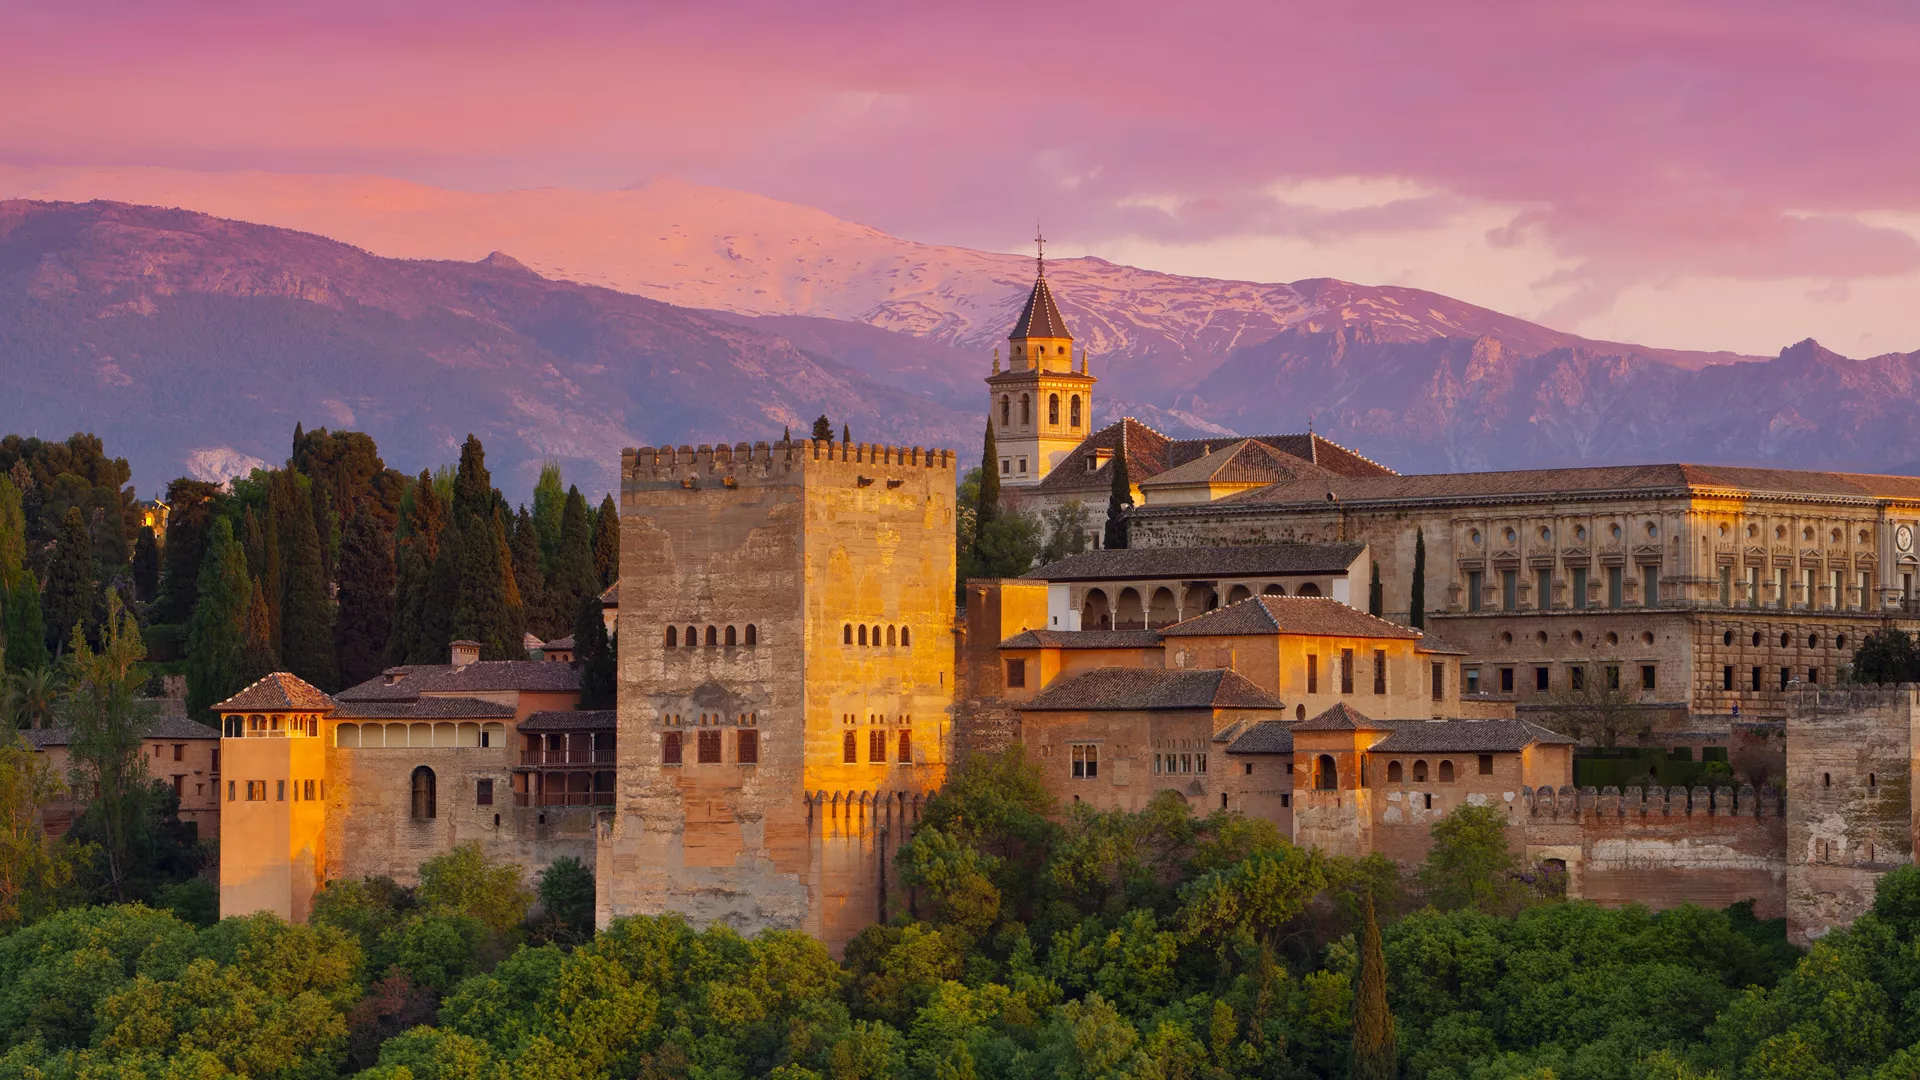 Alhambra in Spain, Europe | Architecture - Rated 5.6